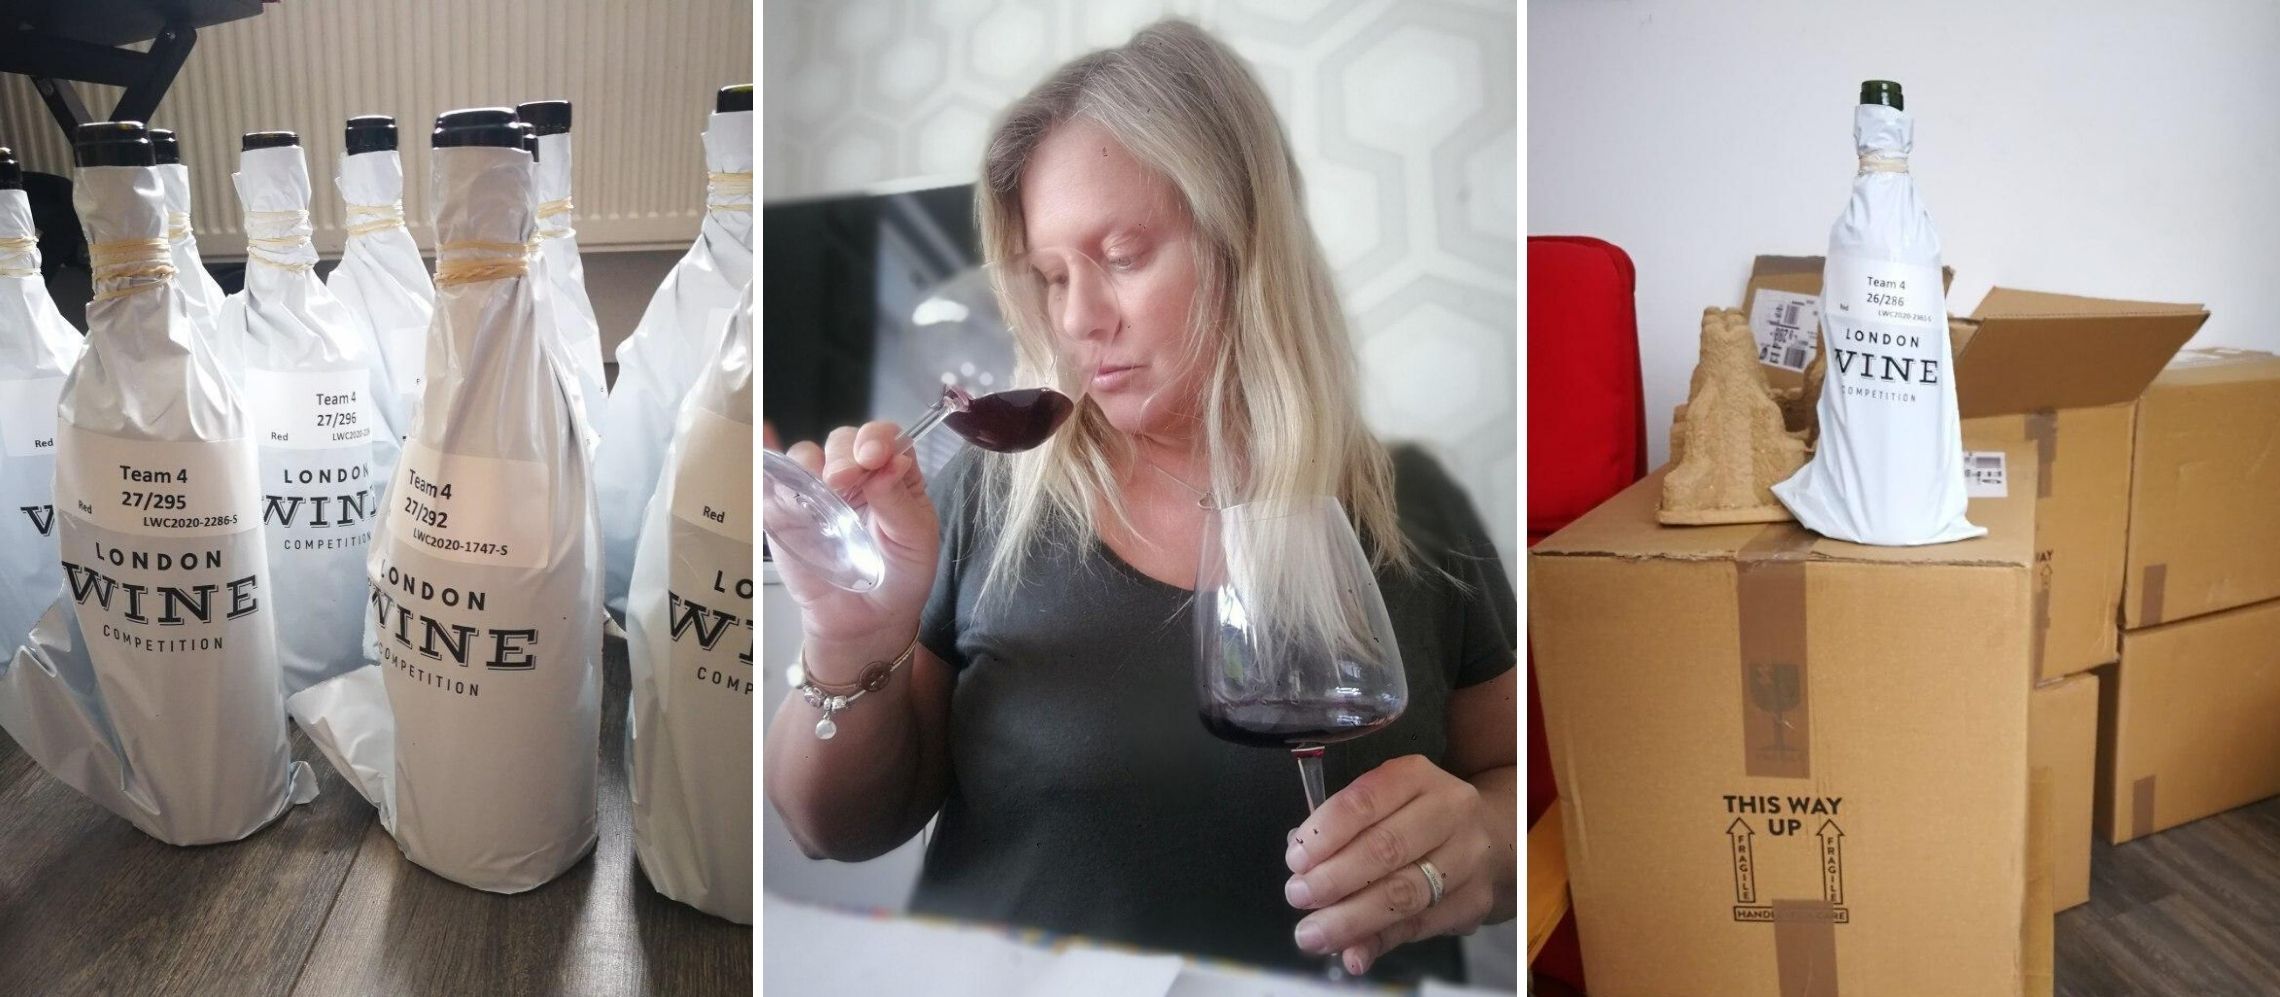 Photo for: Behind The Scenes at the 2020 London Wine Competition